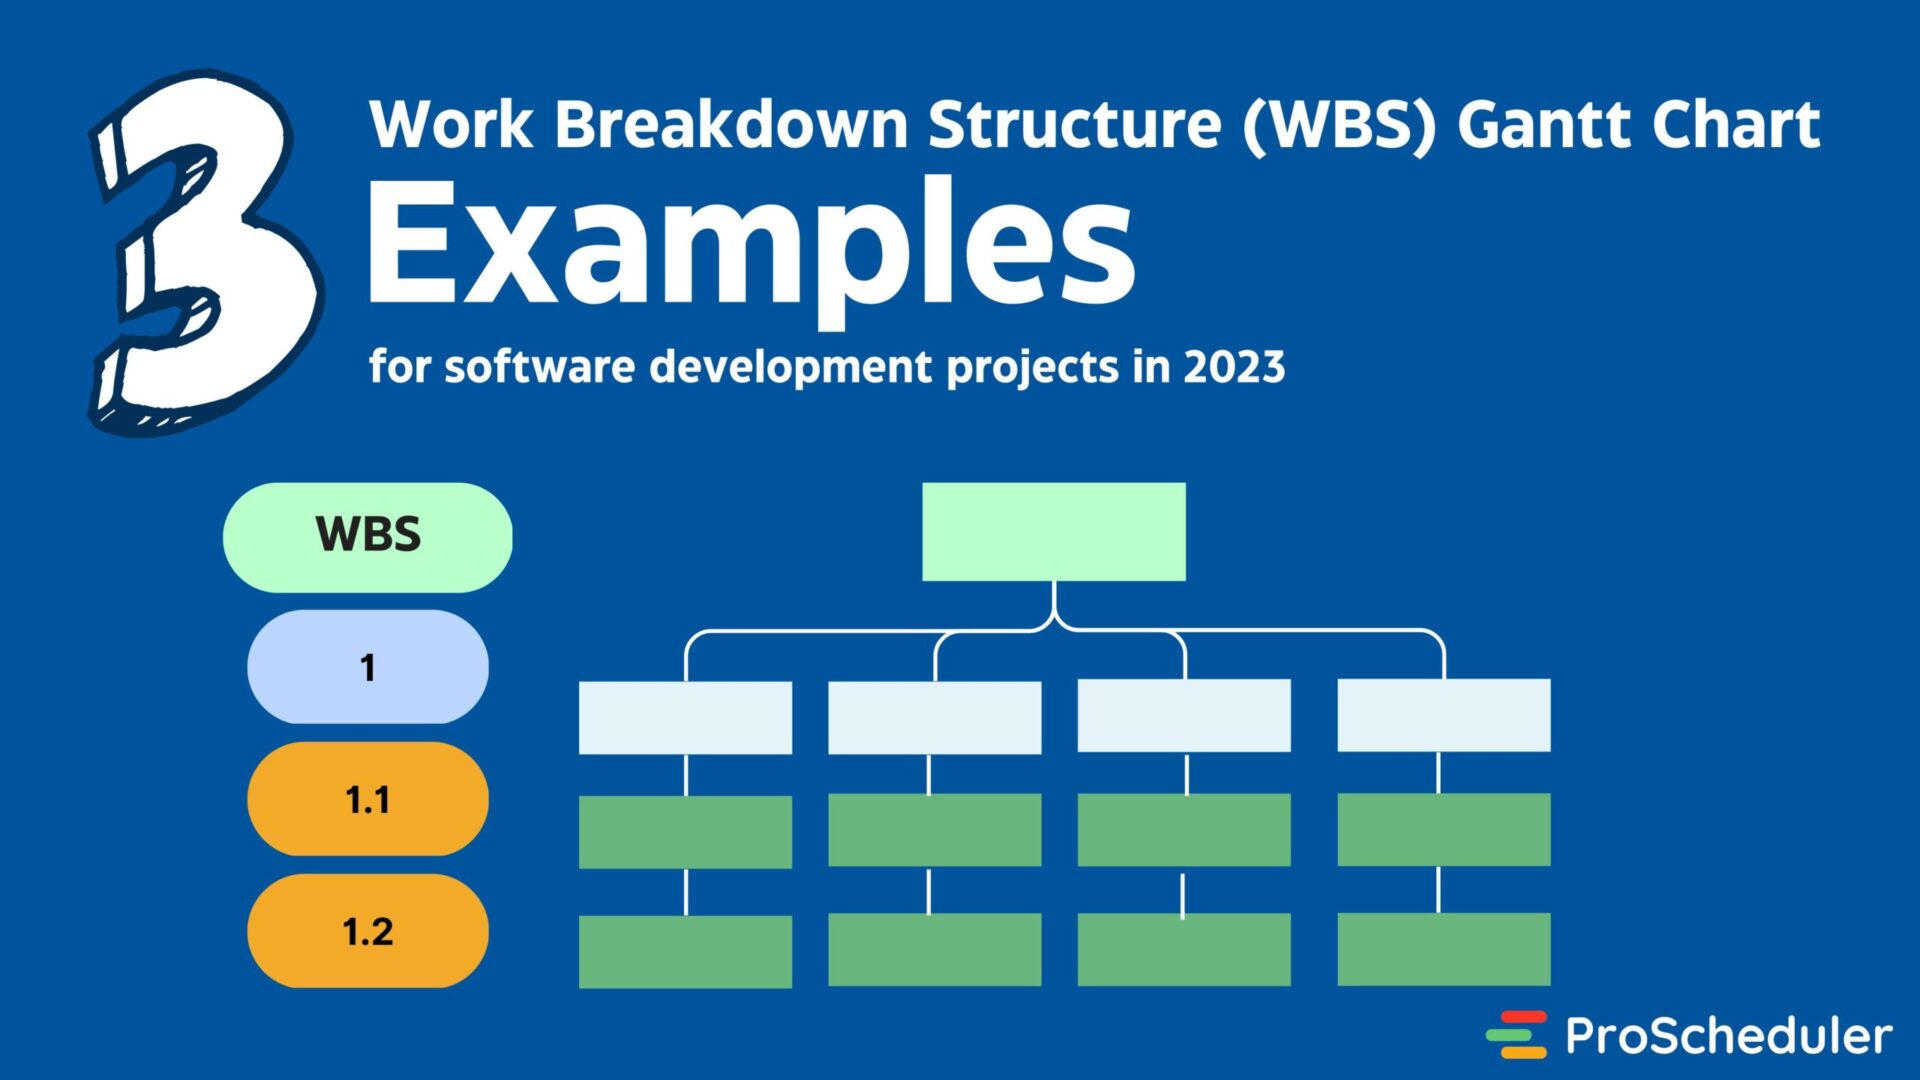 3 Work Breakdown Structure (WBS) Gantt Chart examples for software development projects in 2023